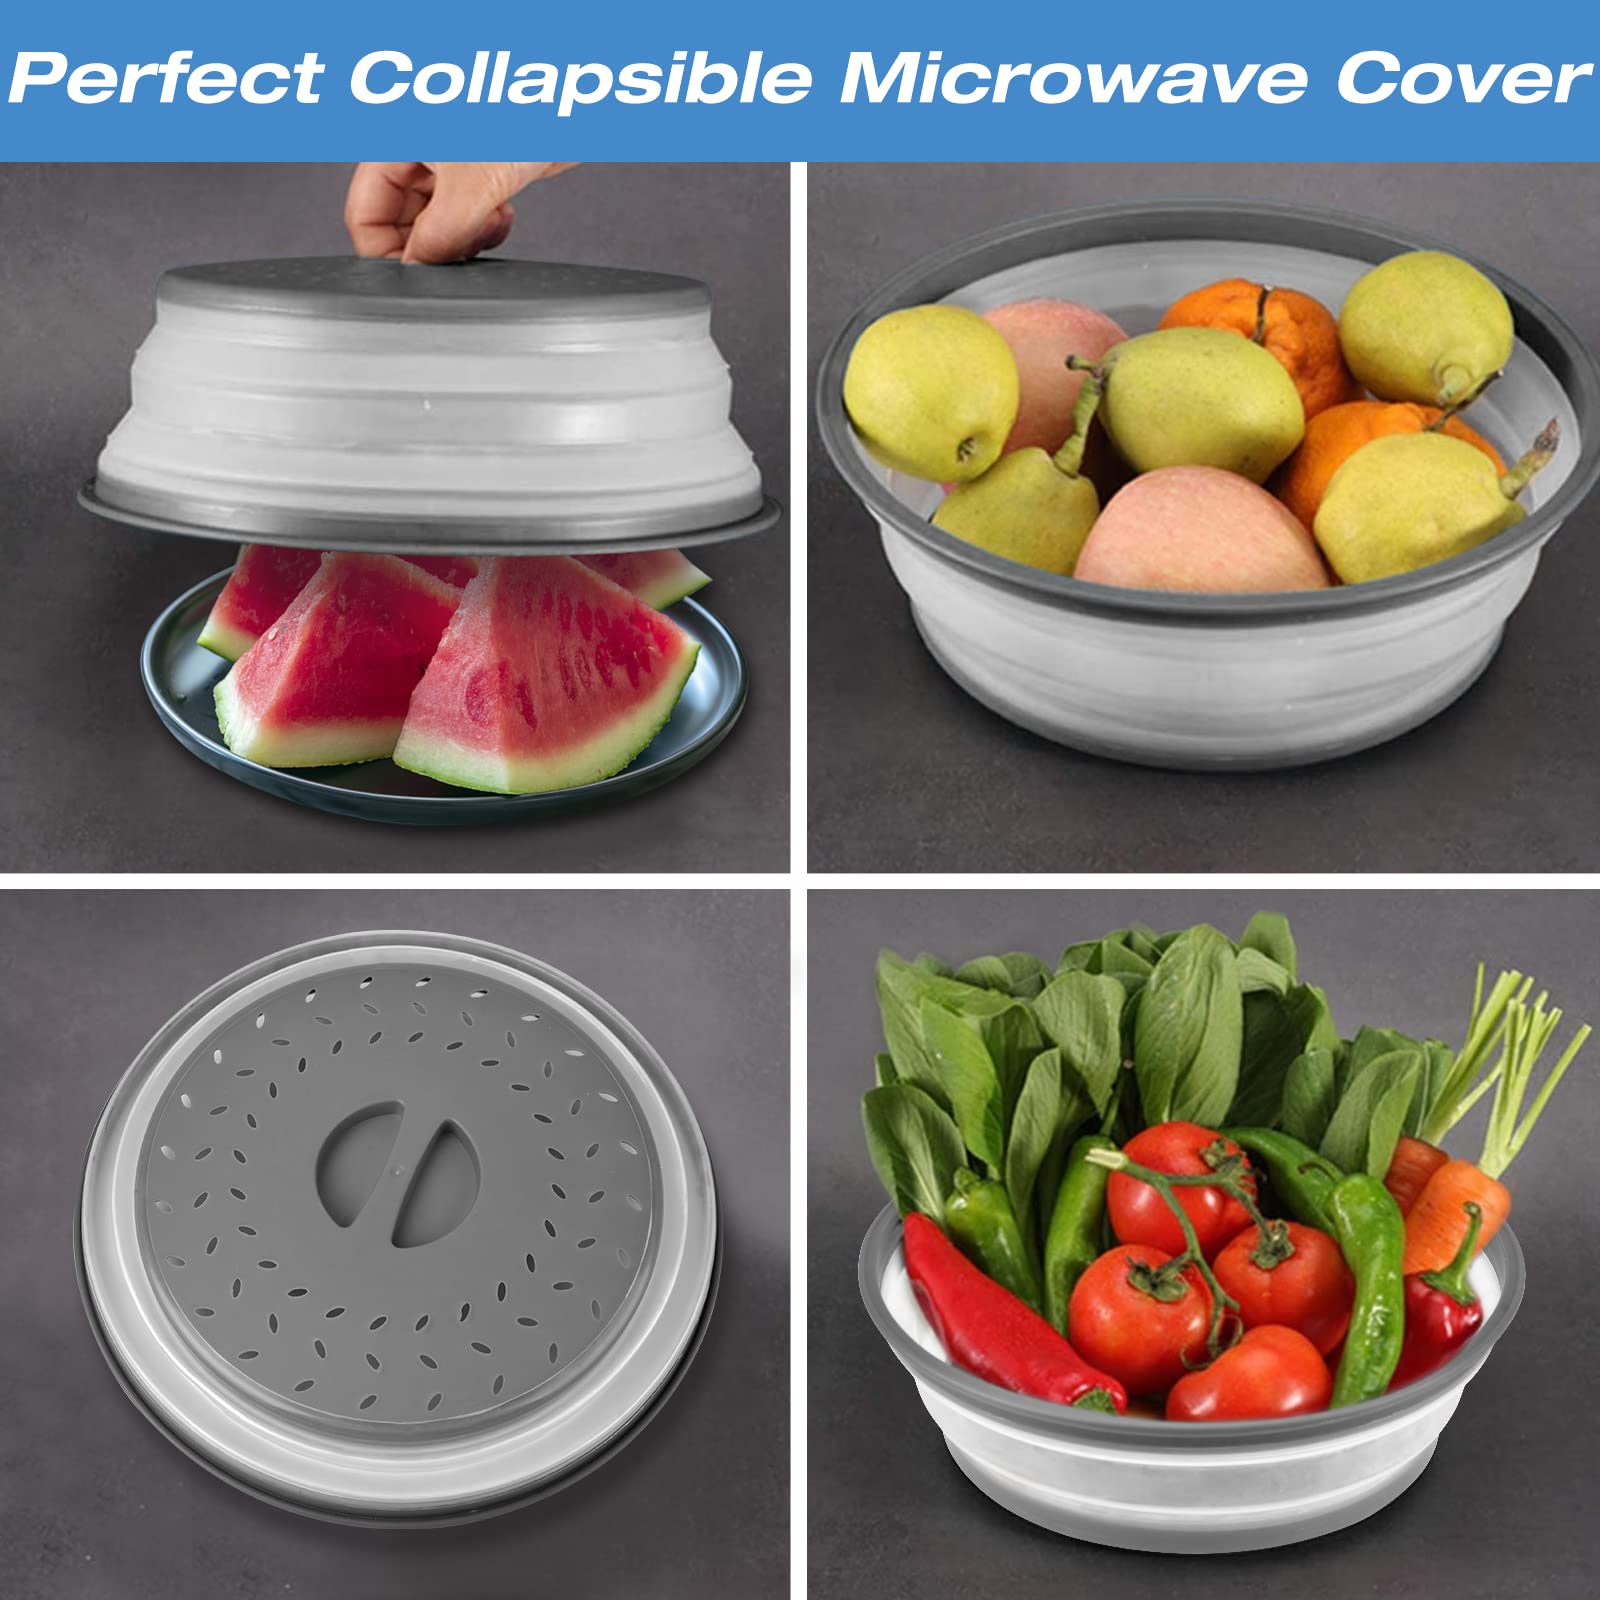 2 Pack Collapsible Microwave Cover Splatter Proof Food Plate, 10.5 inch Round With Grip Handle, Kitchen Gadgets Dishwasher Safe and BPA Free